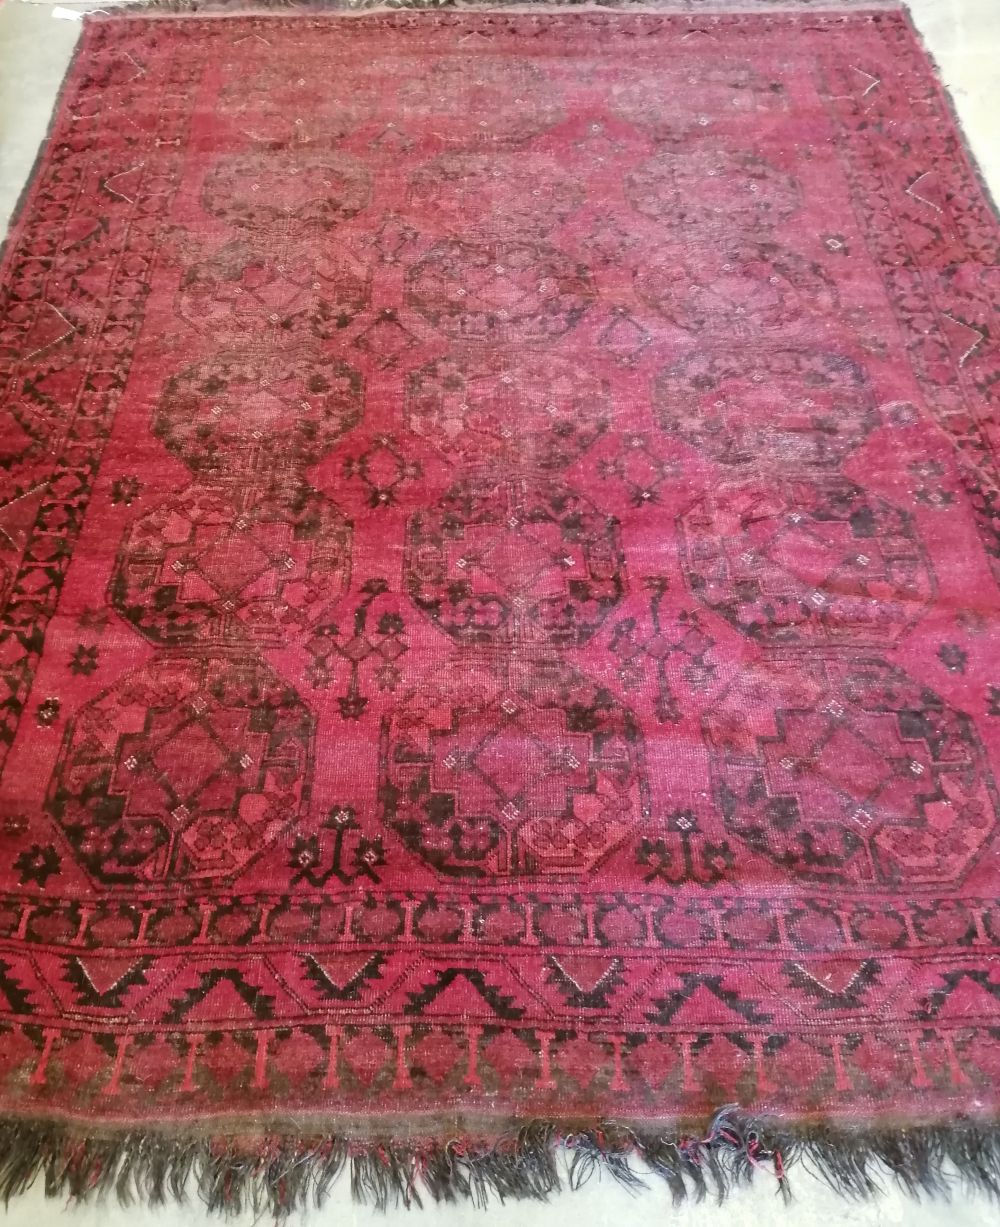 An Afghan red ground carpet, approx. 200x 260cm